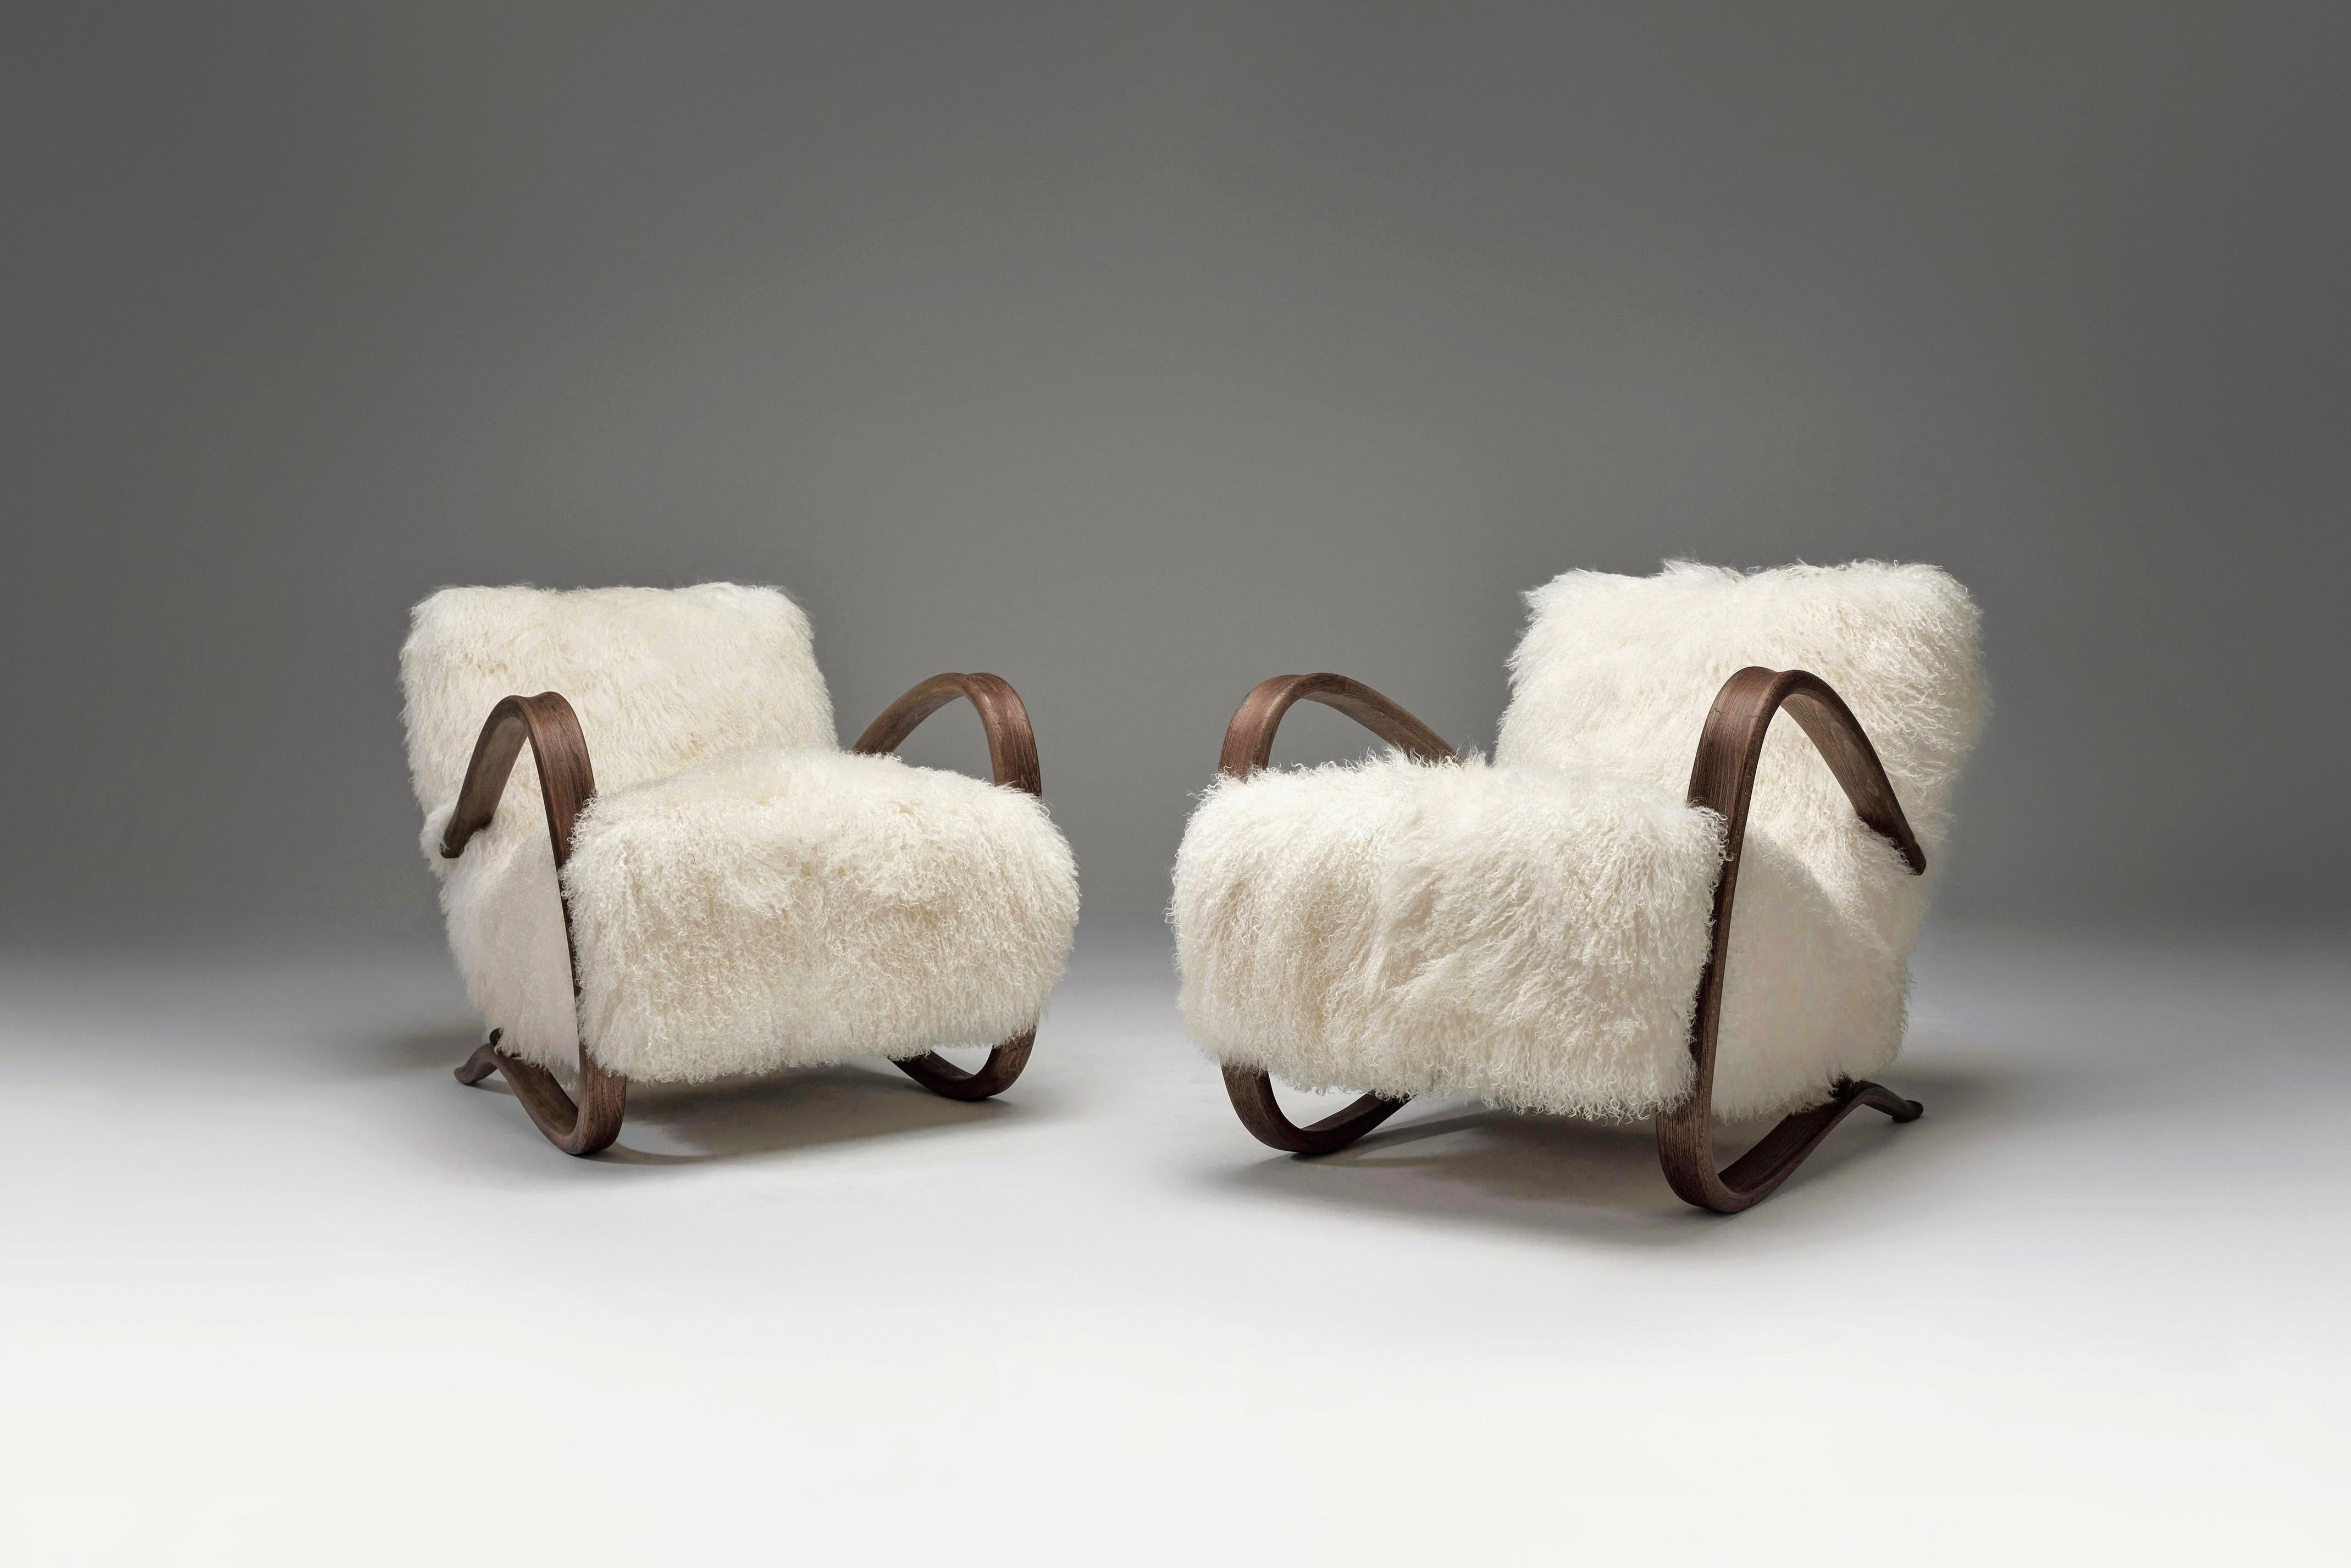 ndrich Halabala lounge chairs model “H-269”, Czech Republic, 1930s.

Amazing armchairs upholstered in white Tibetan lambswool with curly hair.

These chairs have a dynamic and generous appearance, together with beautiful, fuzzy upholstery add a